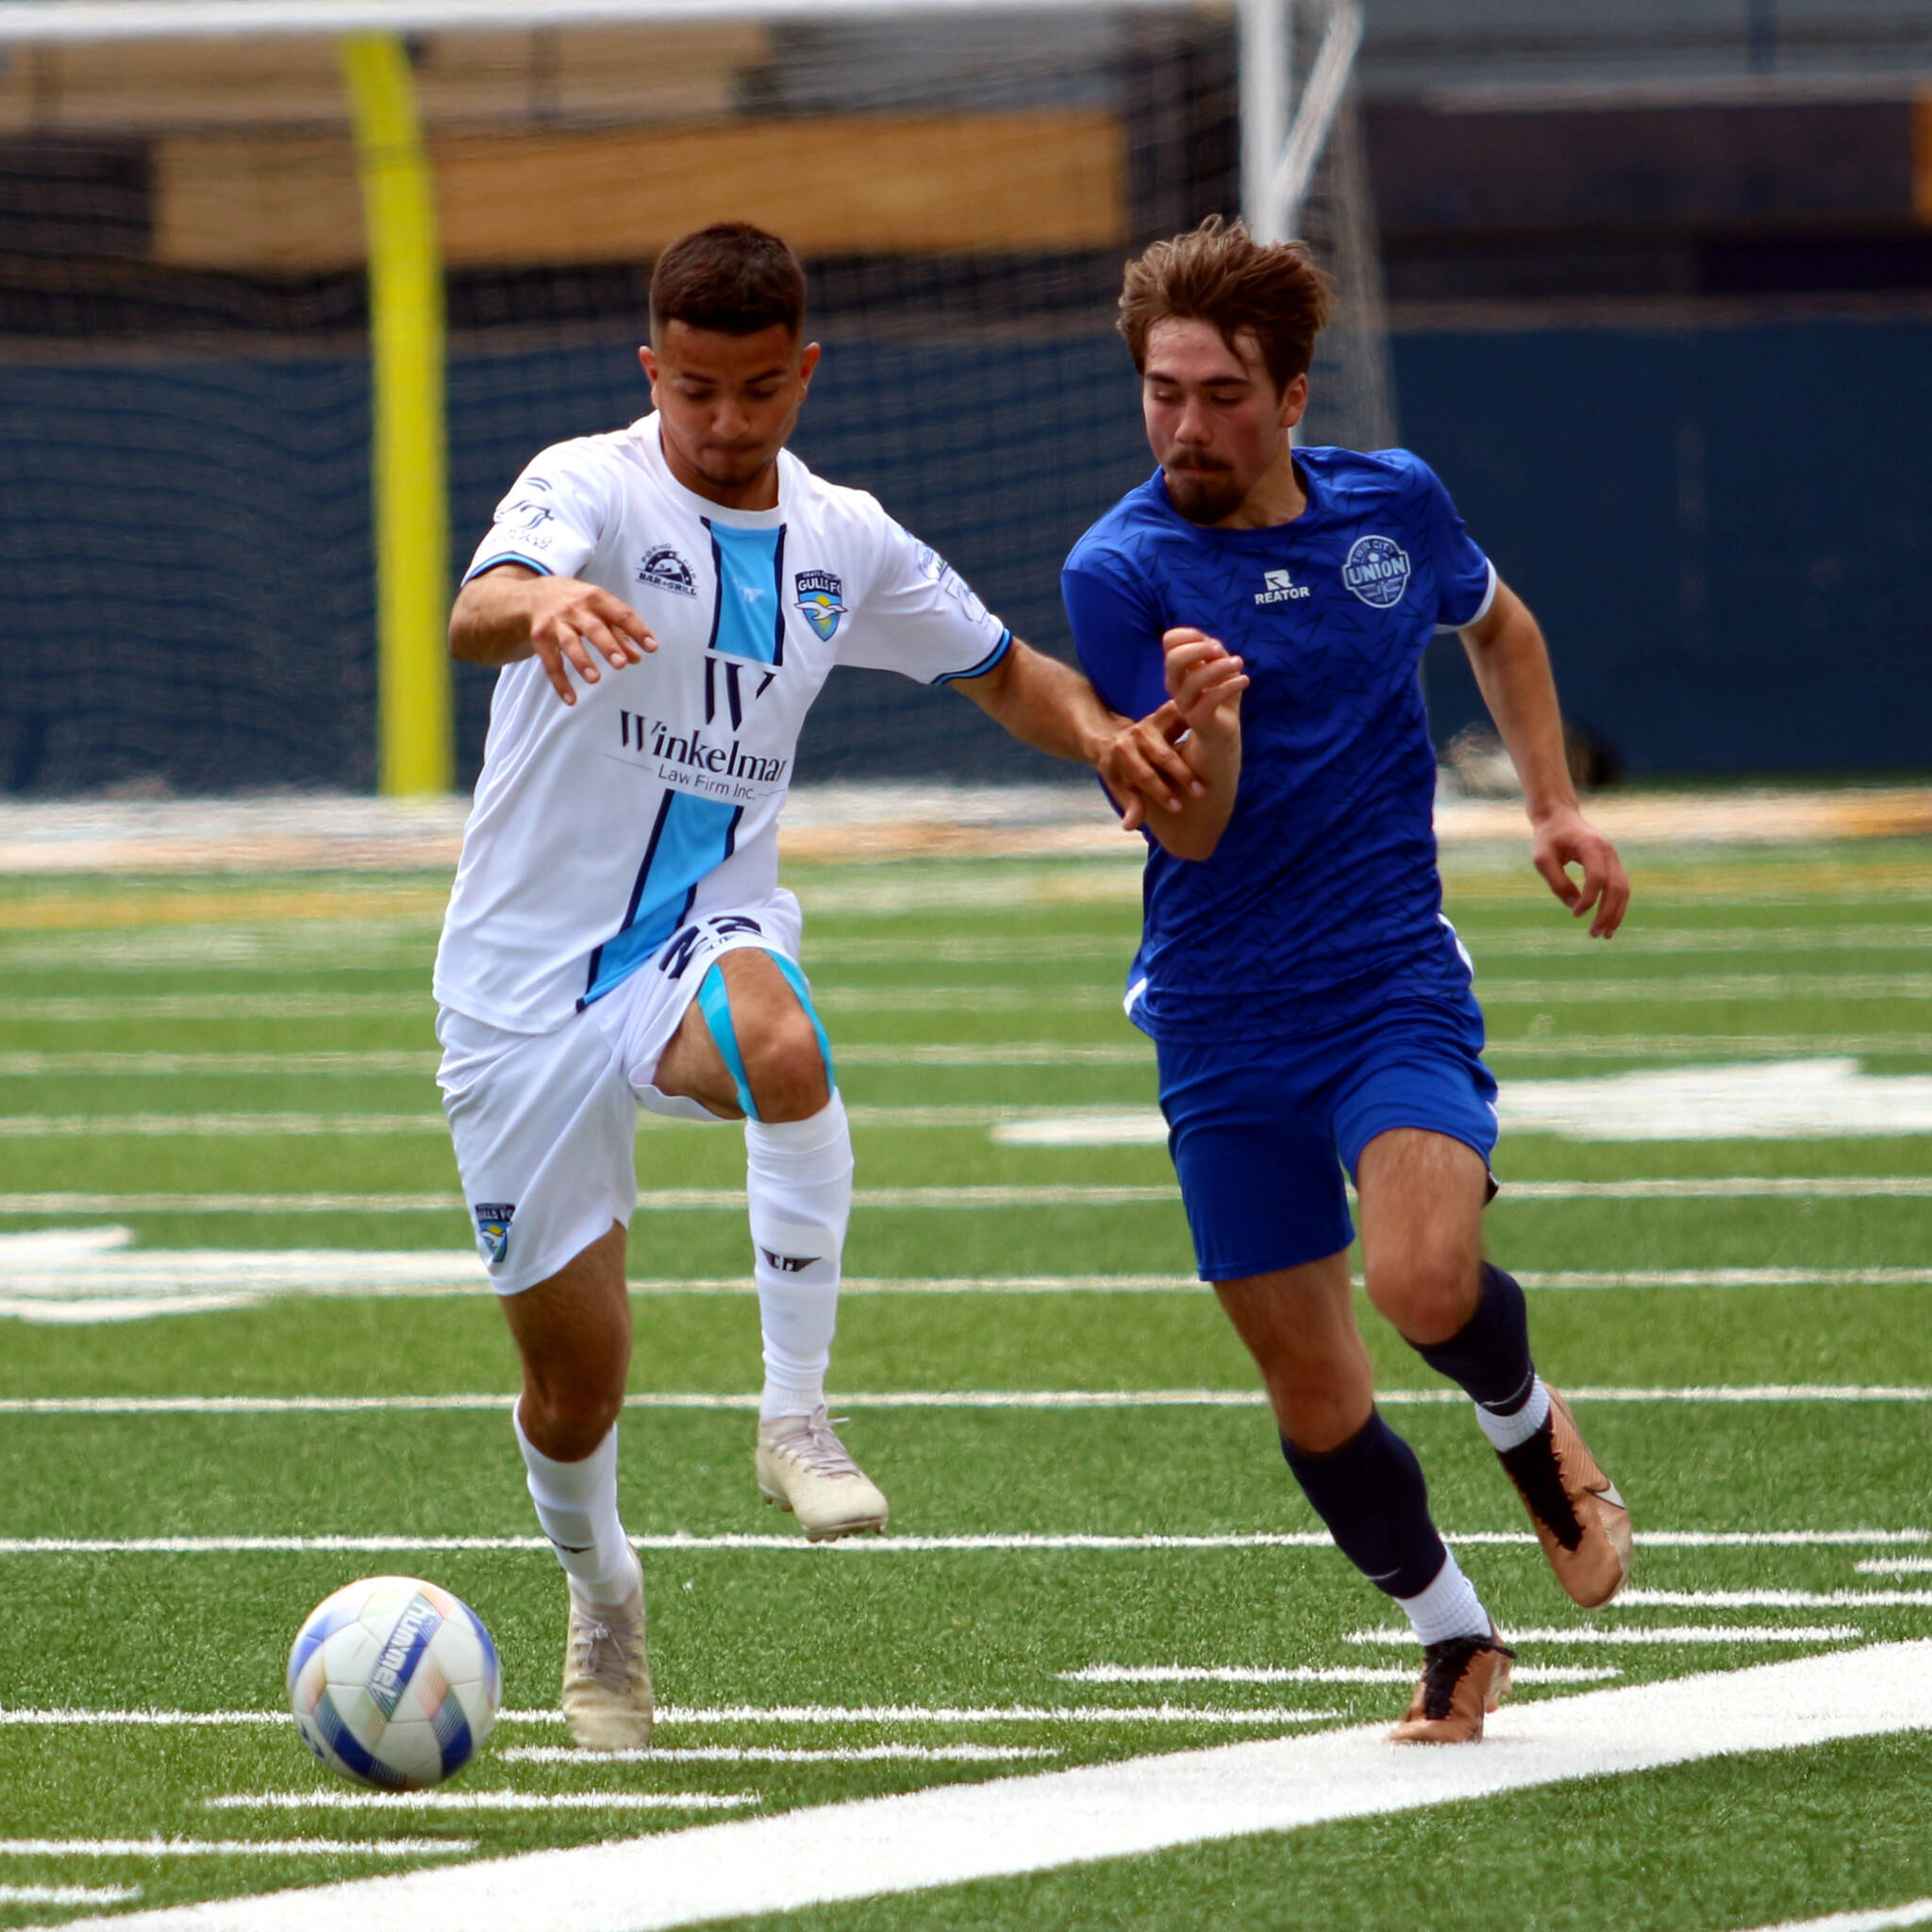 RYAN SPARKS | THE DAILY WORLD Grays Harbor Gulls defender Adonis Torres (left) dribbles forward during a 3-2 loss to Twin City Union on Sunday at Stewart Field in Aberdeen.